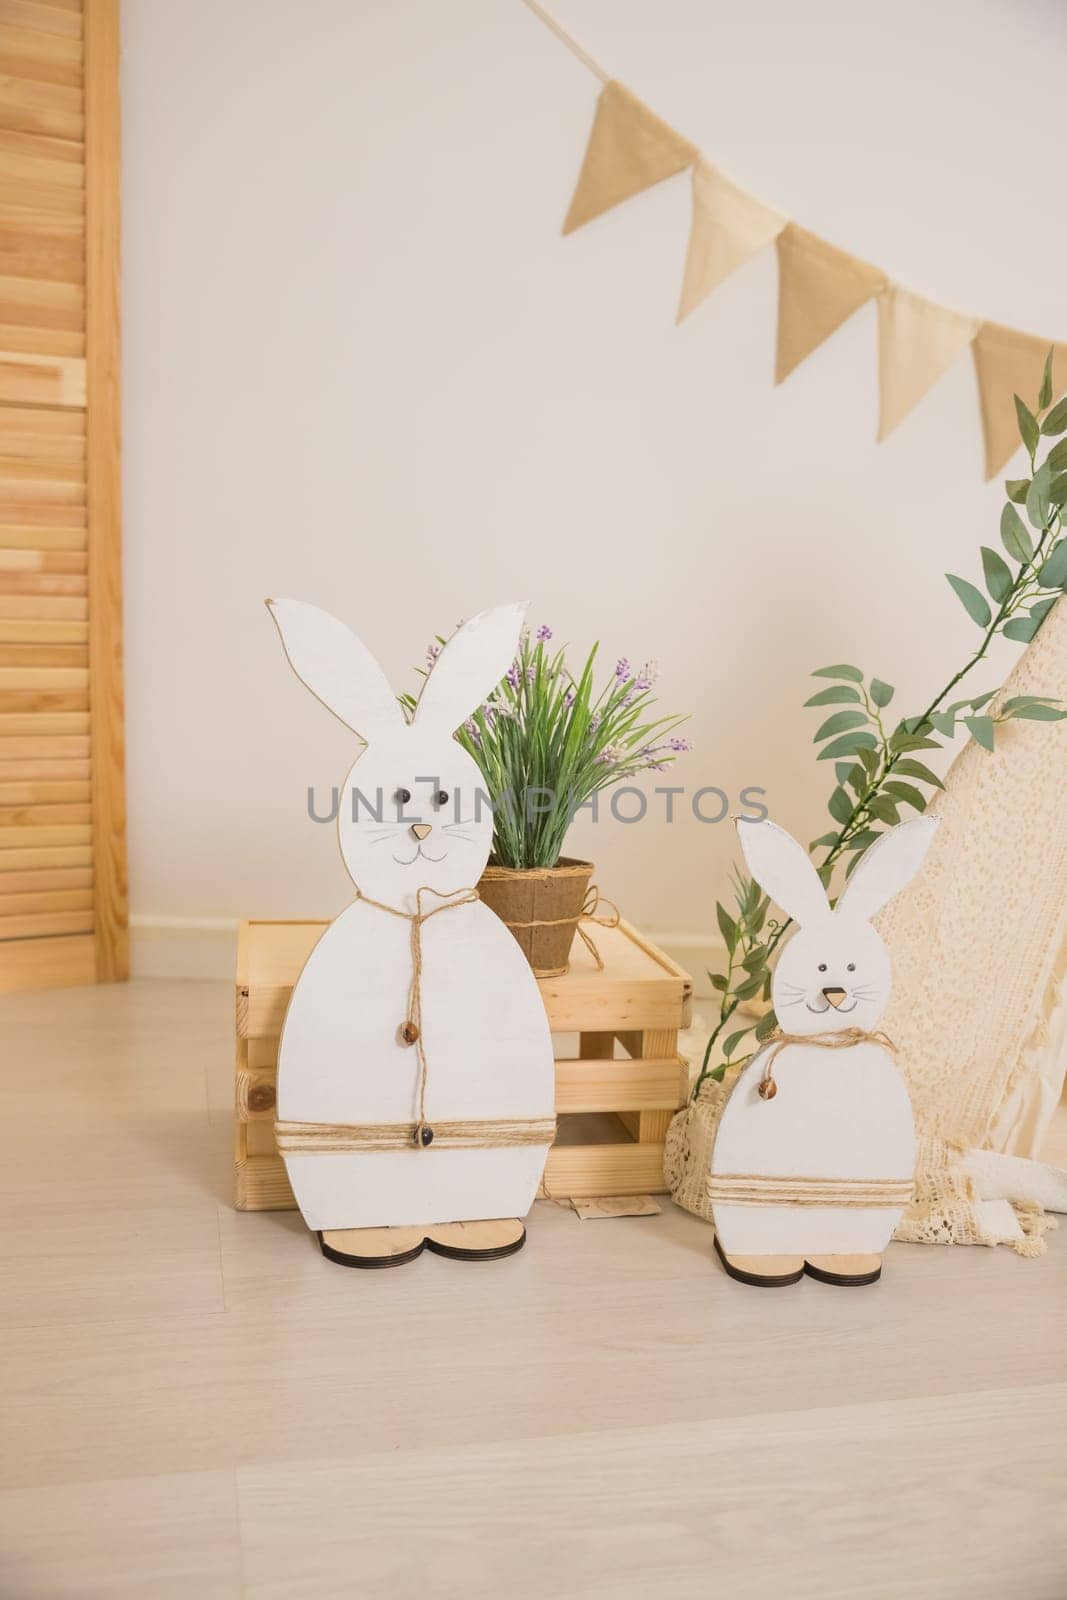 Interior design of easter living room with easter bunny sculptures, garland, plants, wooden boxes,beige wall with stucco. Home decor.Warm and cozy composition by YuliaYaspe1979